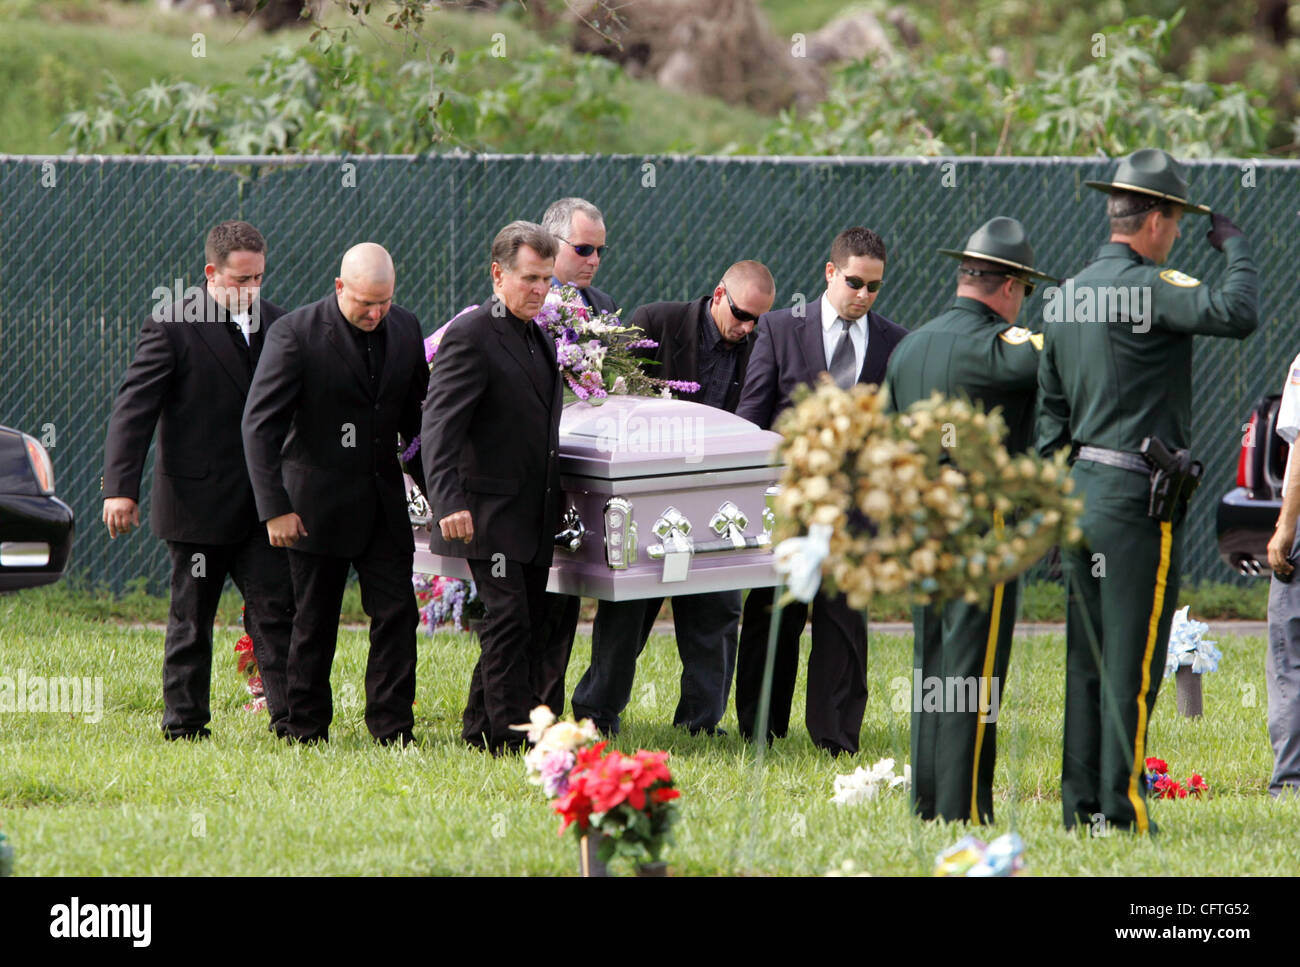 011207 met funeral Staff photo by Richard Graulich/The Palm Beach Post 0032264A WEST PALM BEACH - Pallbearers carry Cathy Bryant's casket to a gravesite at Hillcrest Memorial Park during services in West Palm Beach Friday afternoon.  Cathy Bryant and her husband David, both retired in 2004 from the  Stock Photo